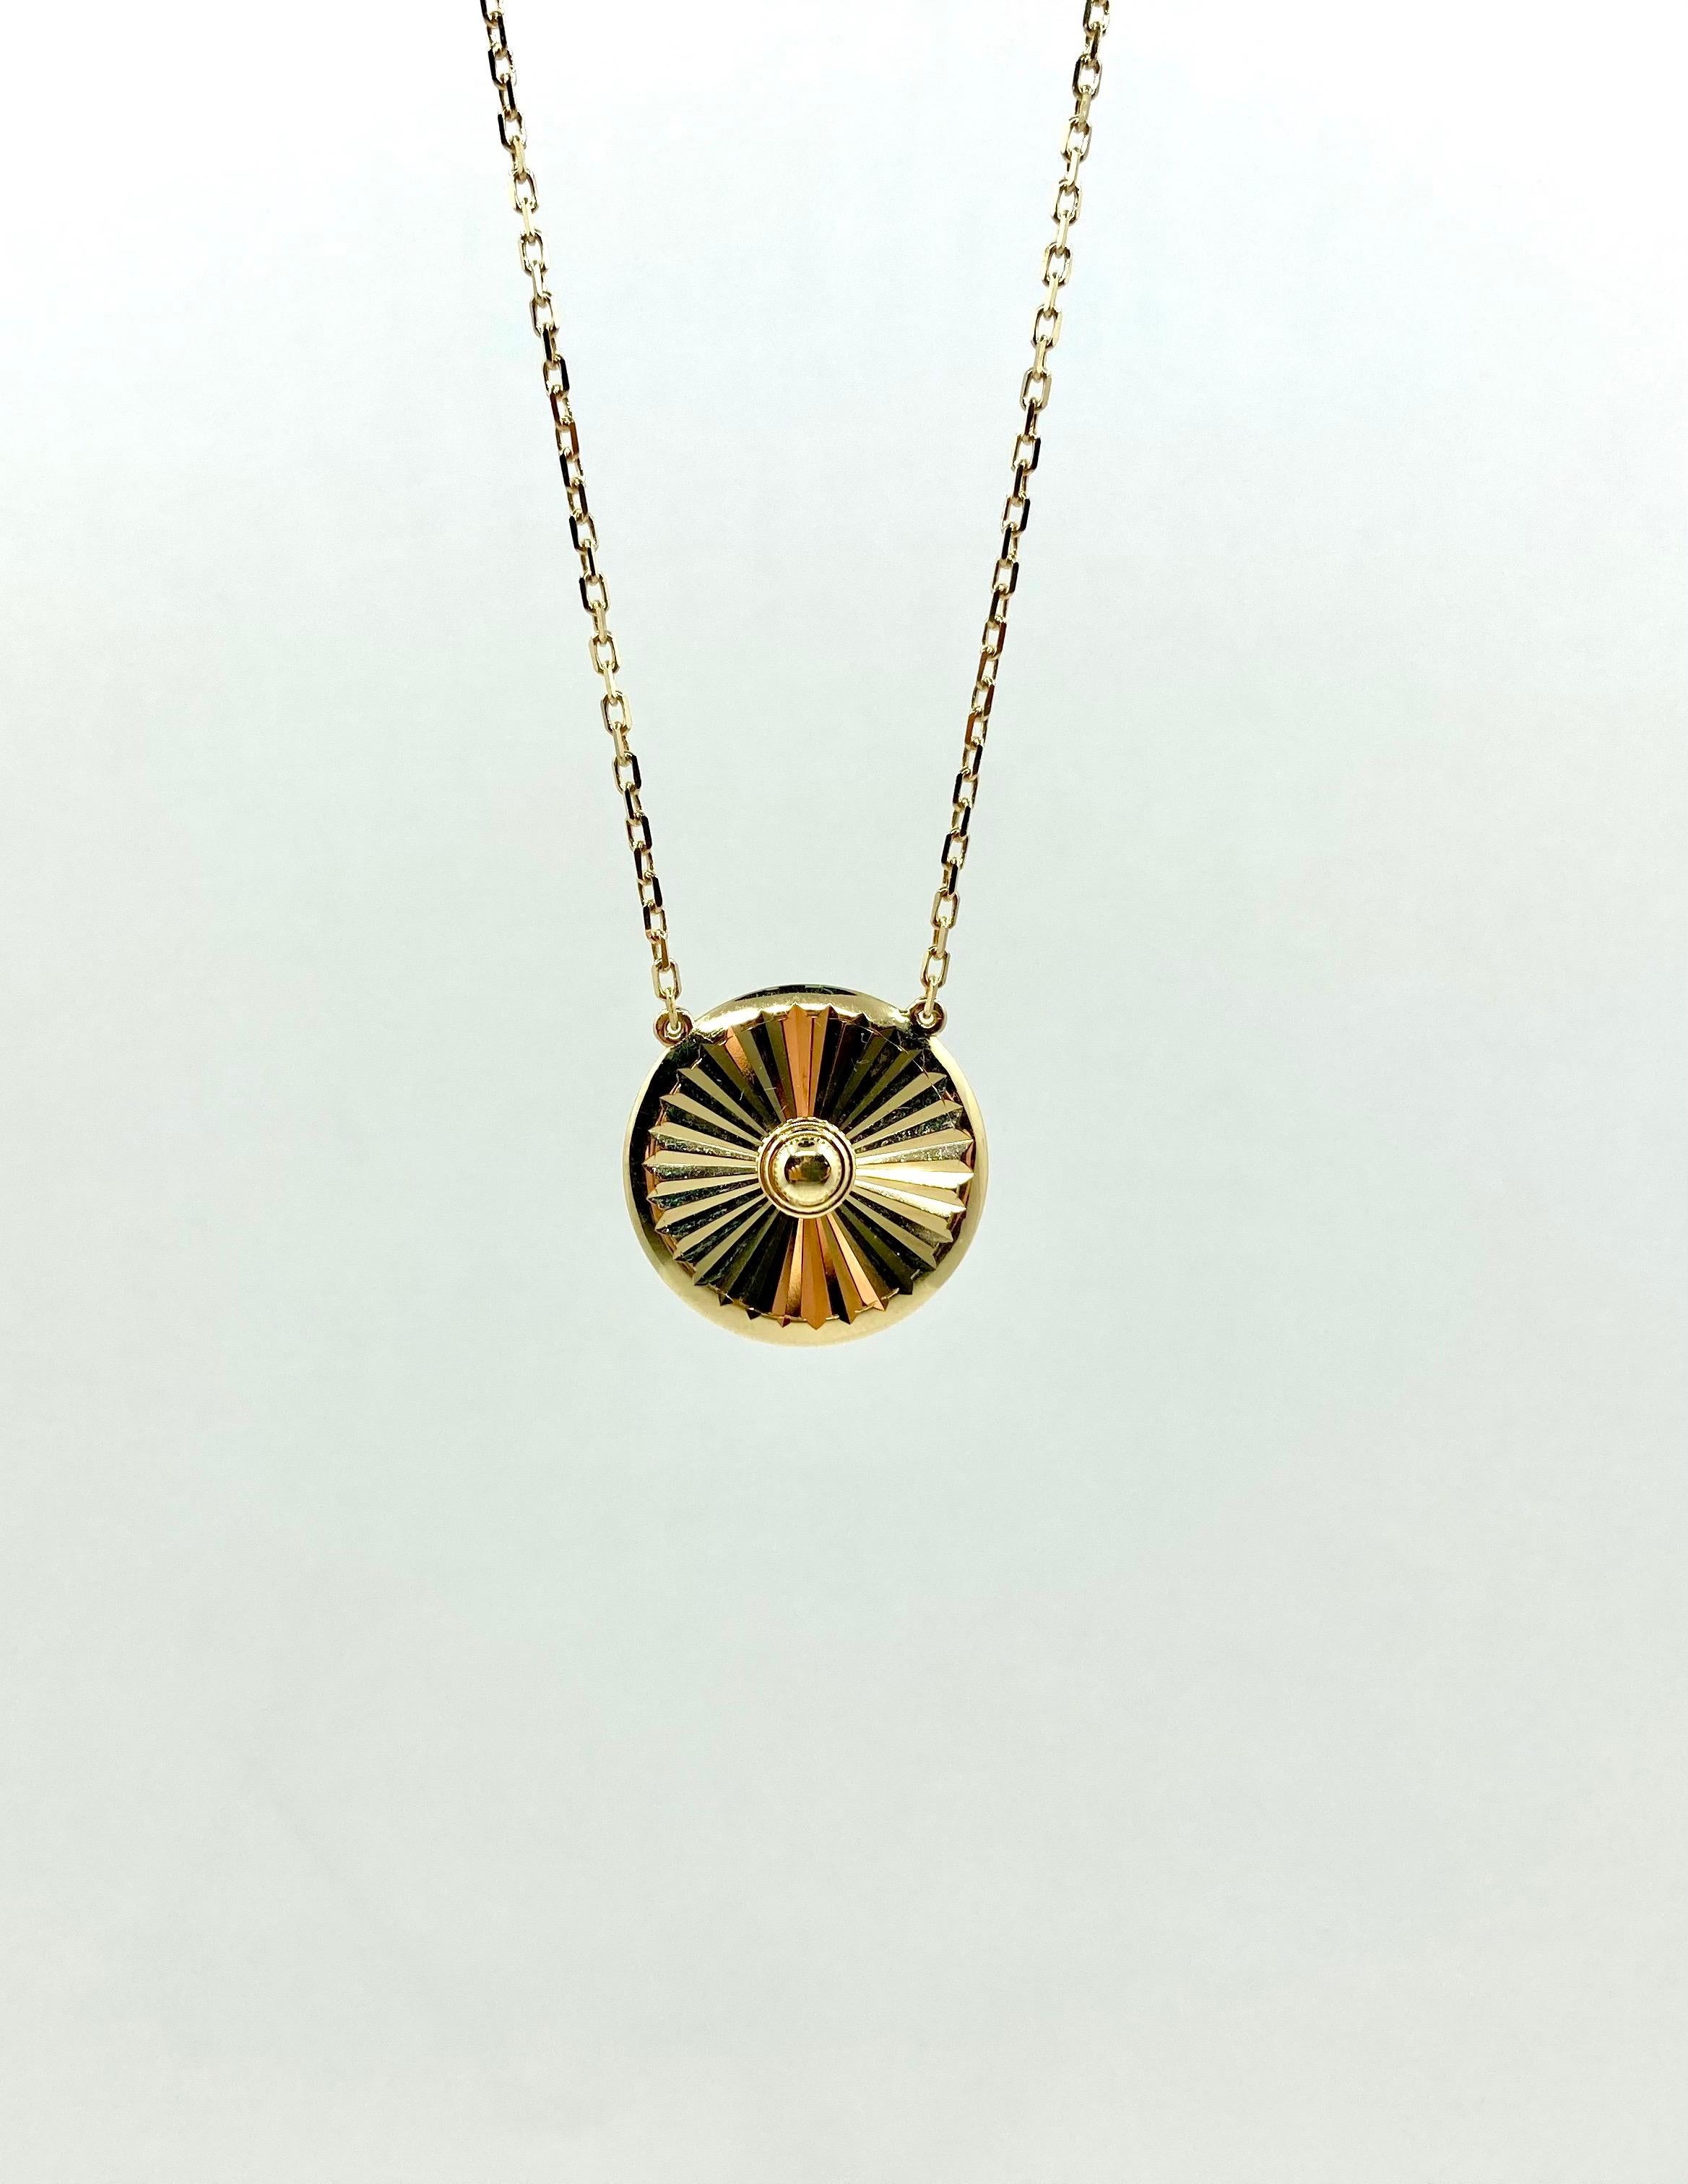 Modern elegant Yellow Gold pendant, large size, Made in Italy by Roberto Casarin. 

A distinct stunning geometry enclosed in a simple yet elegant design. It will add a modern elegant touch to any look and outfit. The fitting is adjustable, thank to